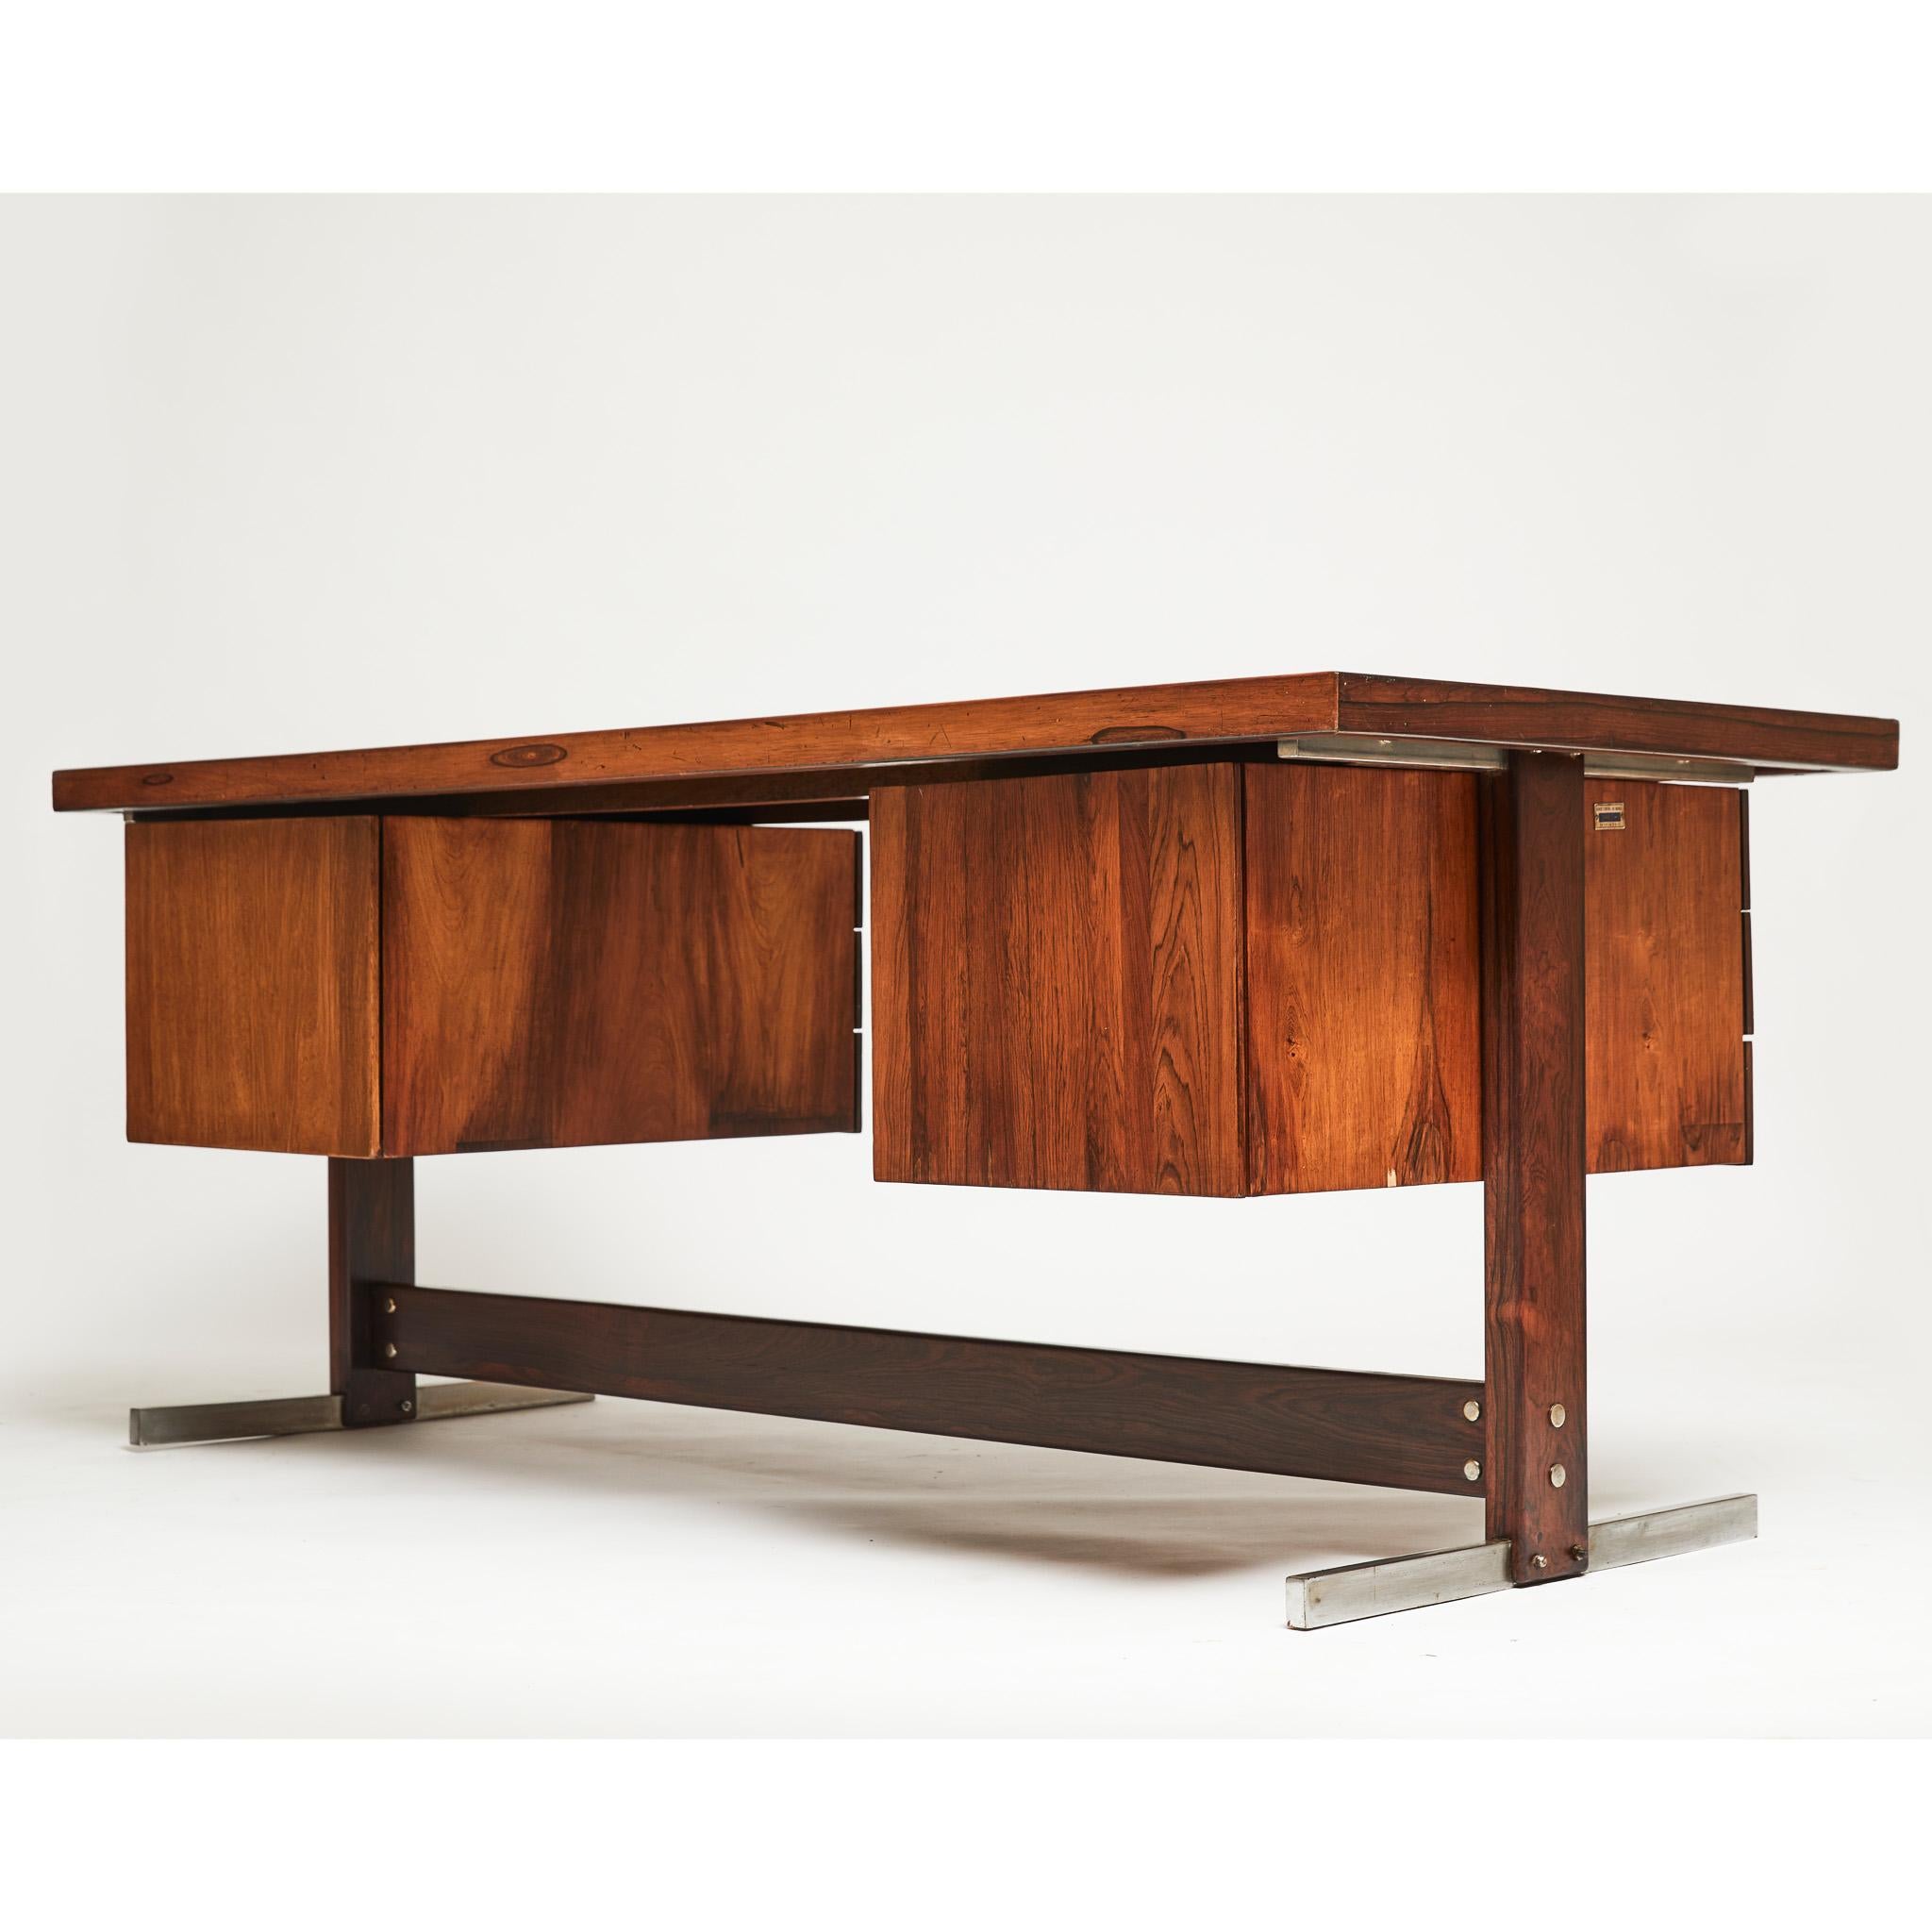 Hand-Painted Brazilian Modern Desk in Hardwood & Chrome by Sergio Rodrigues, Brazil, 1965